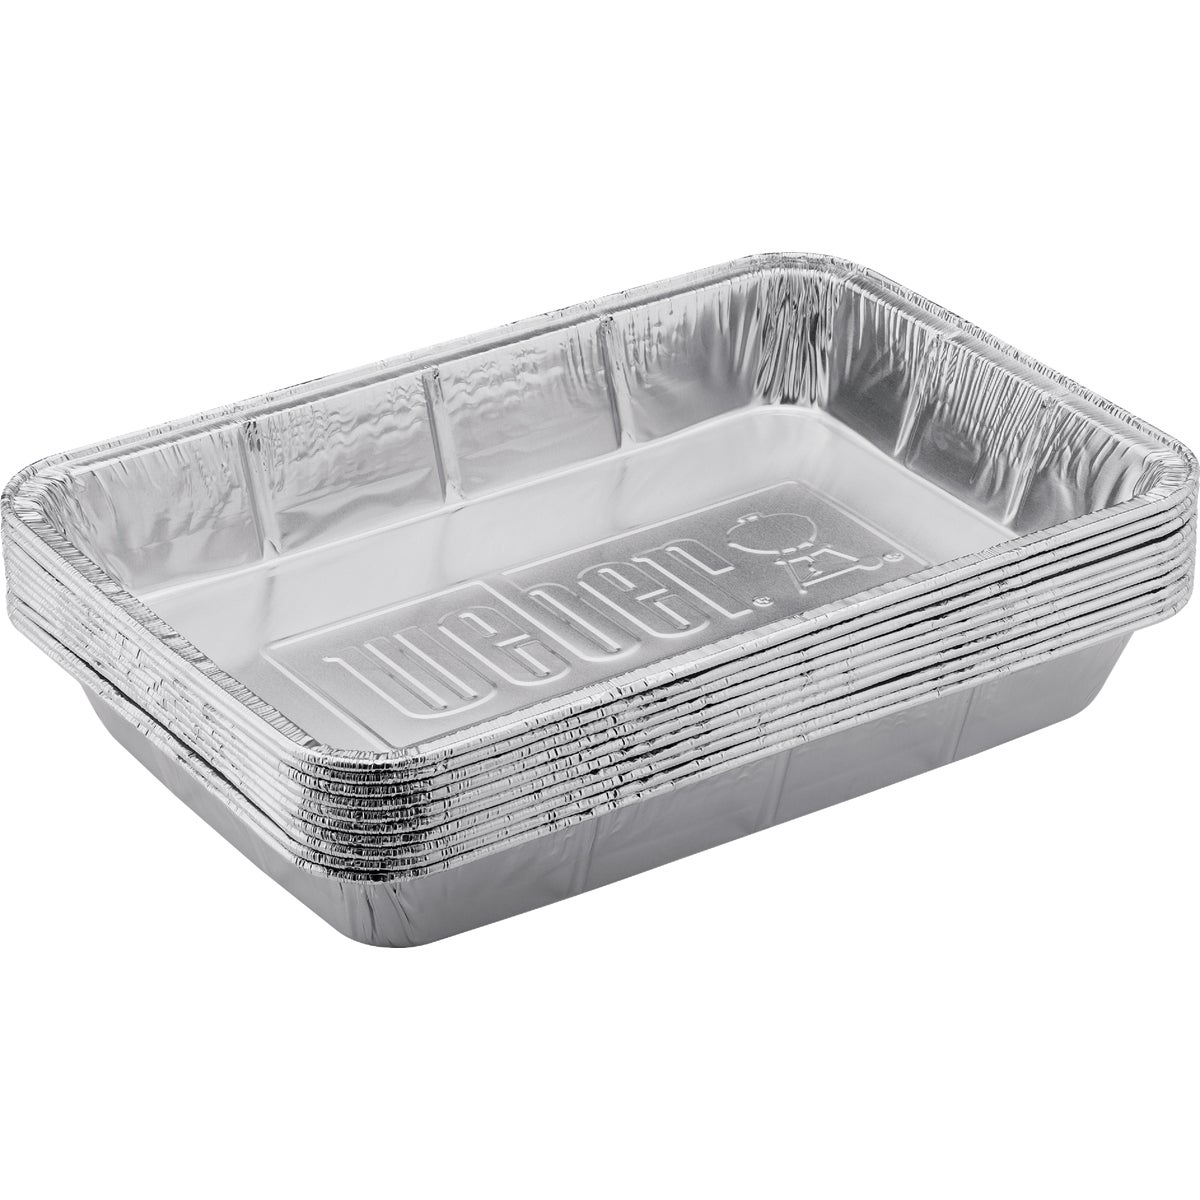 Item 828625, Disposable aluminum pans are designed for indirect cooking.